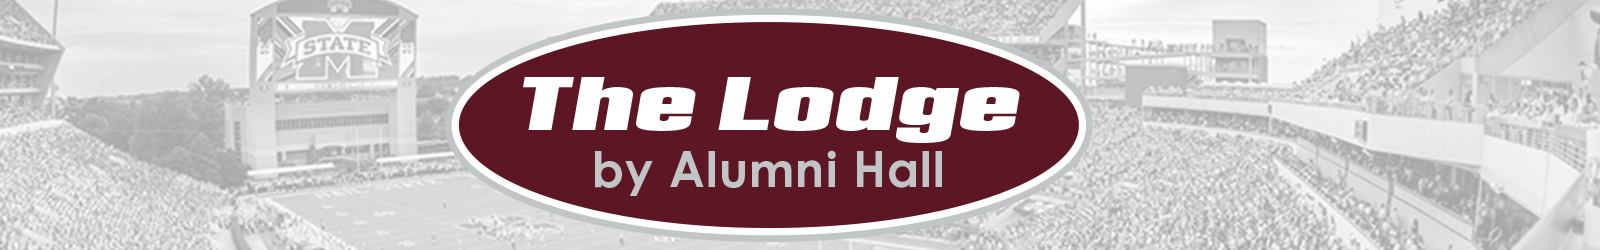 home page banner for The Lodge by Alumni Hall